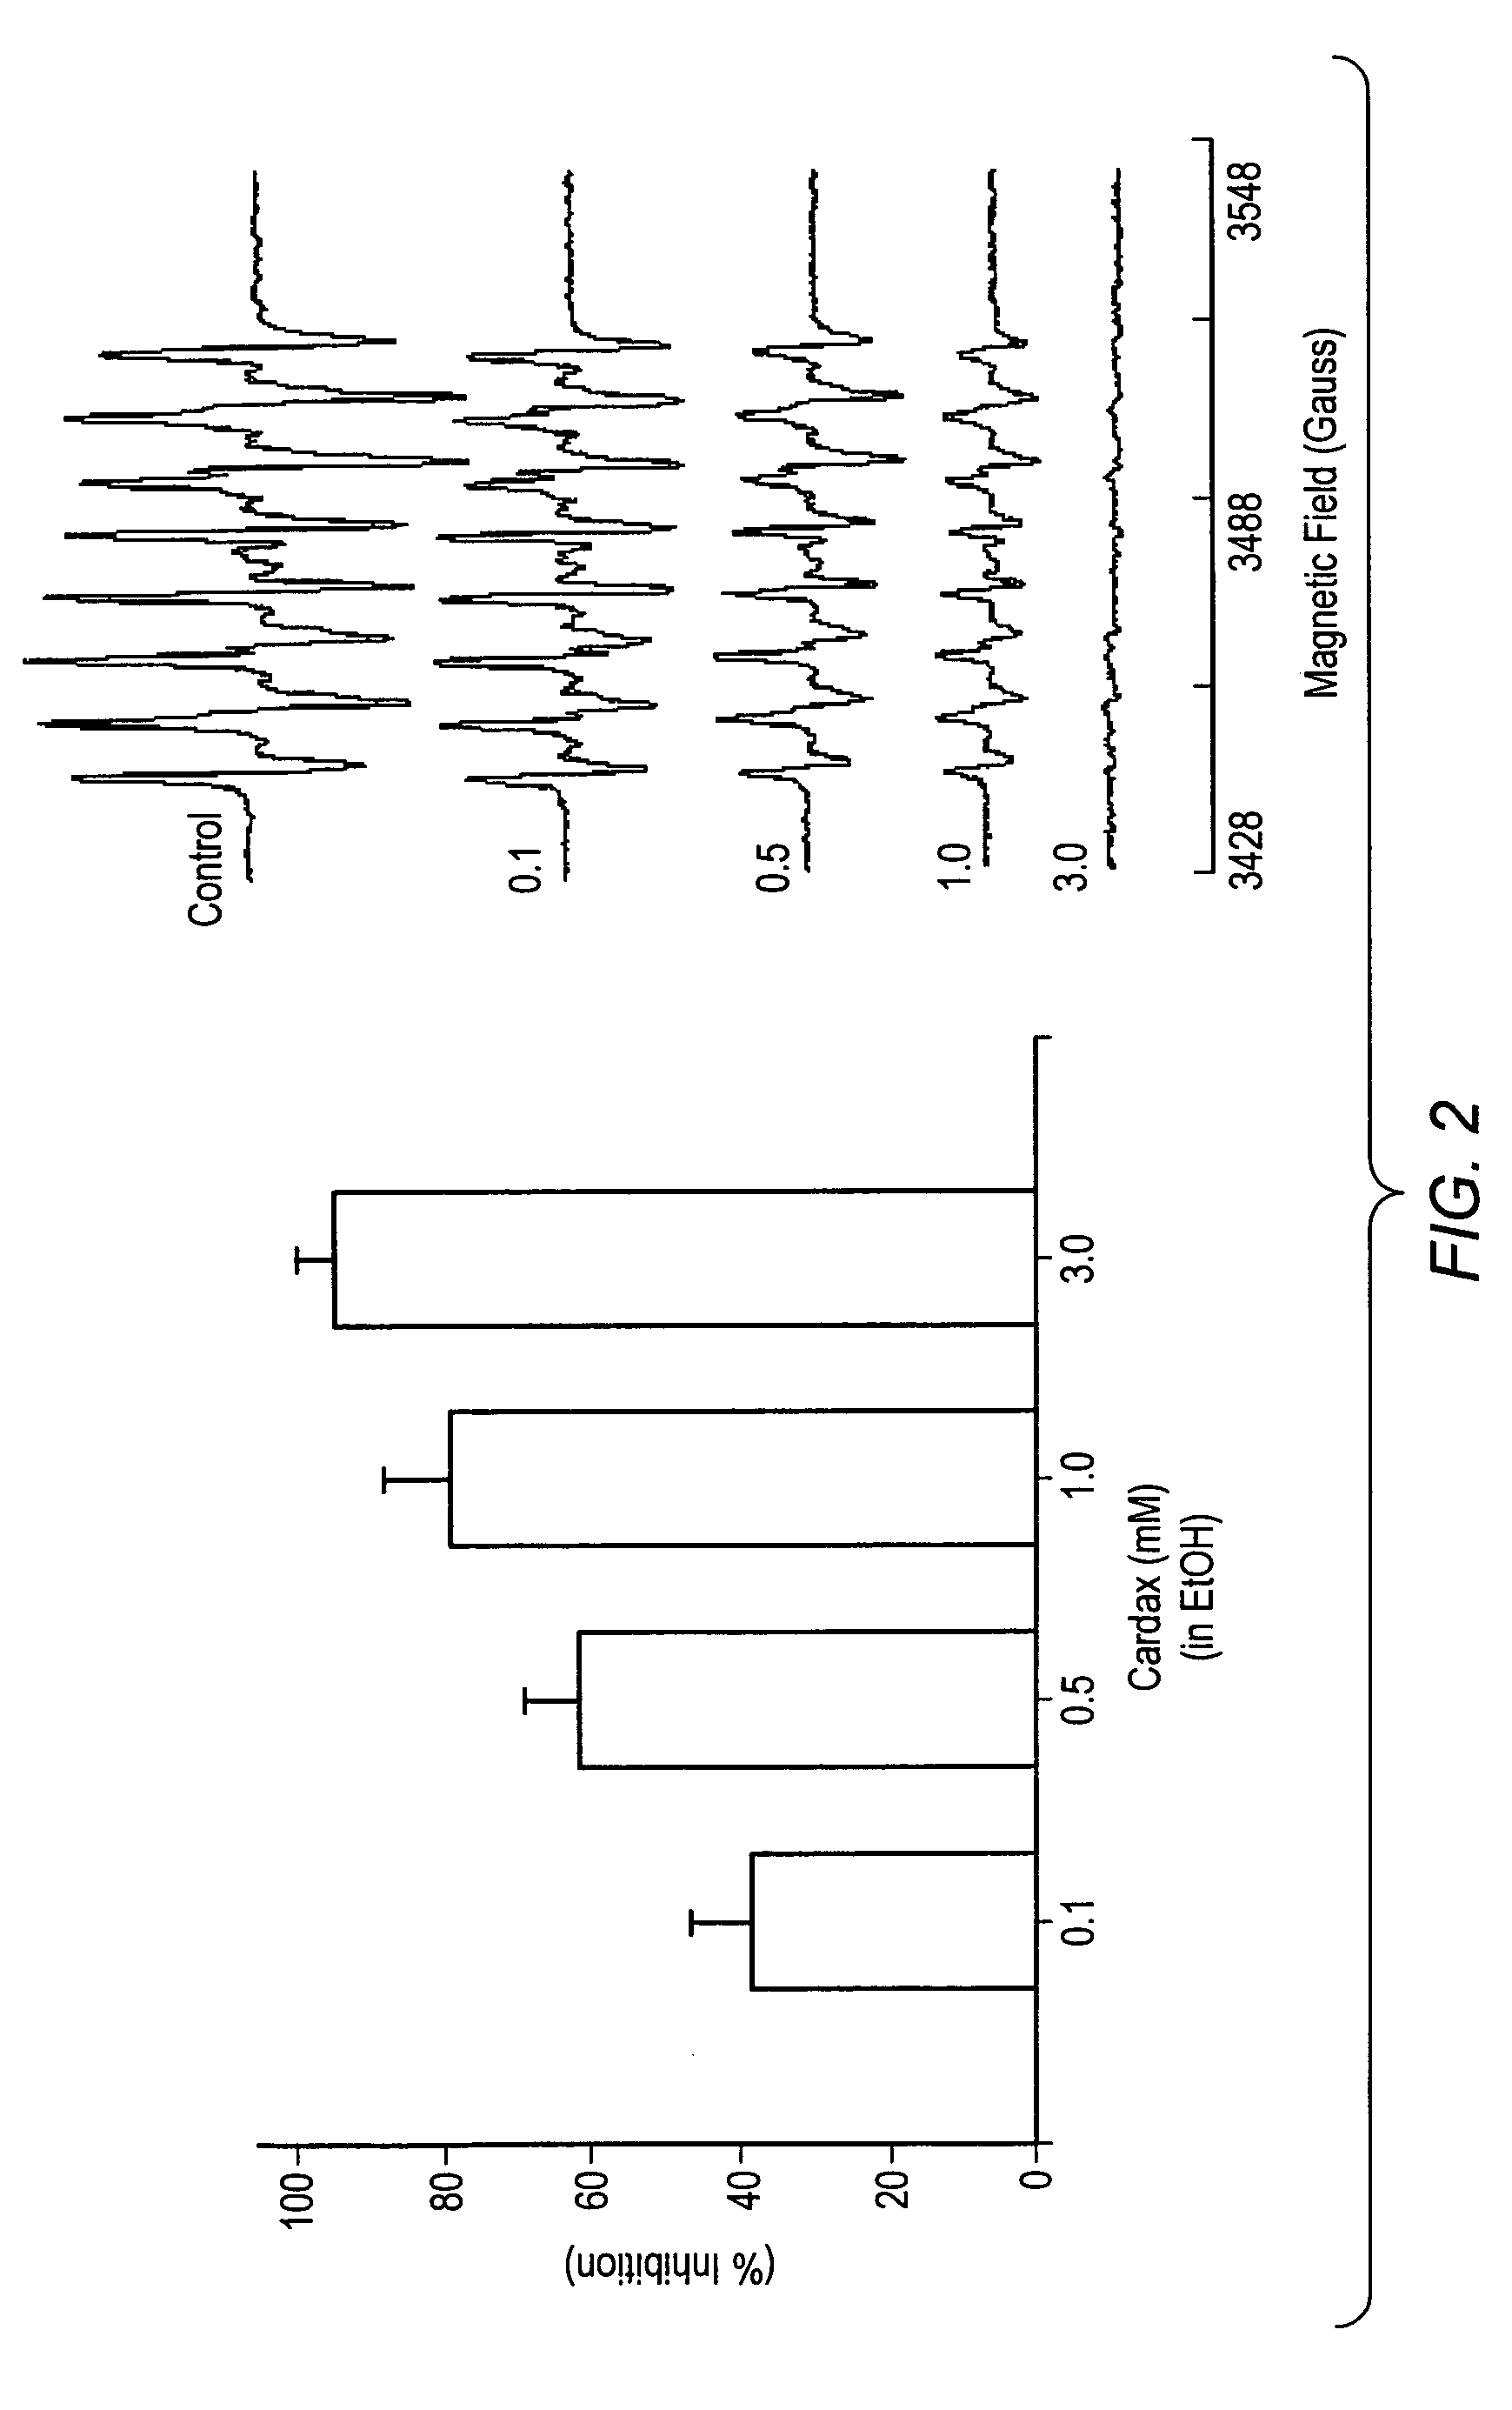 Carotenoid ester analogs or derivatives for the inhibition and amelioration of liver disease